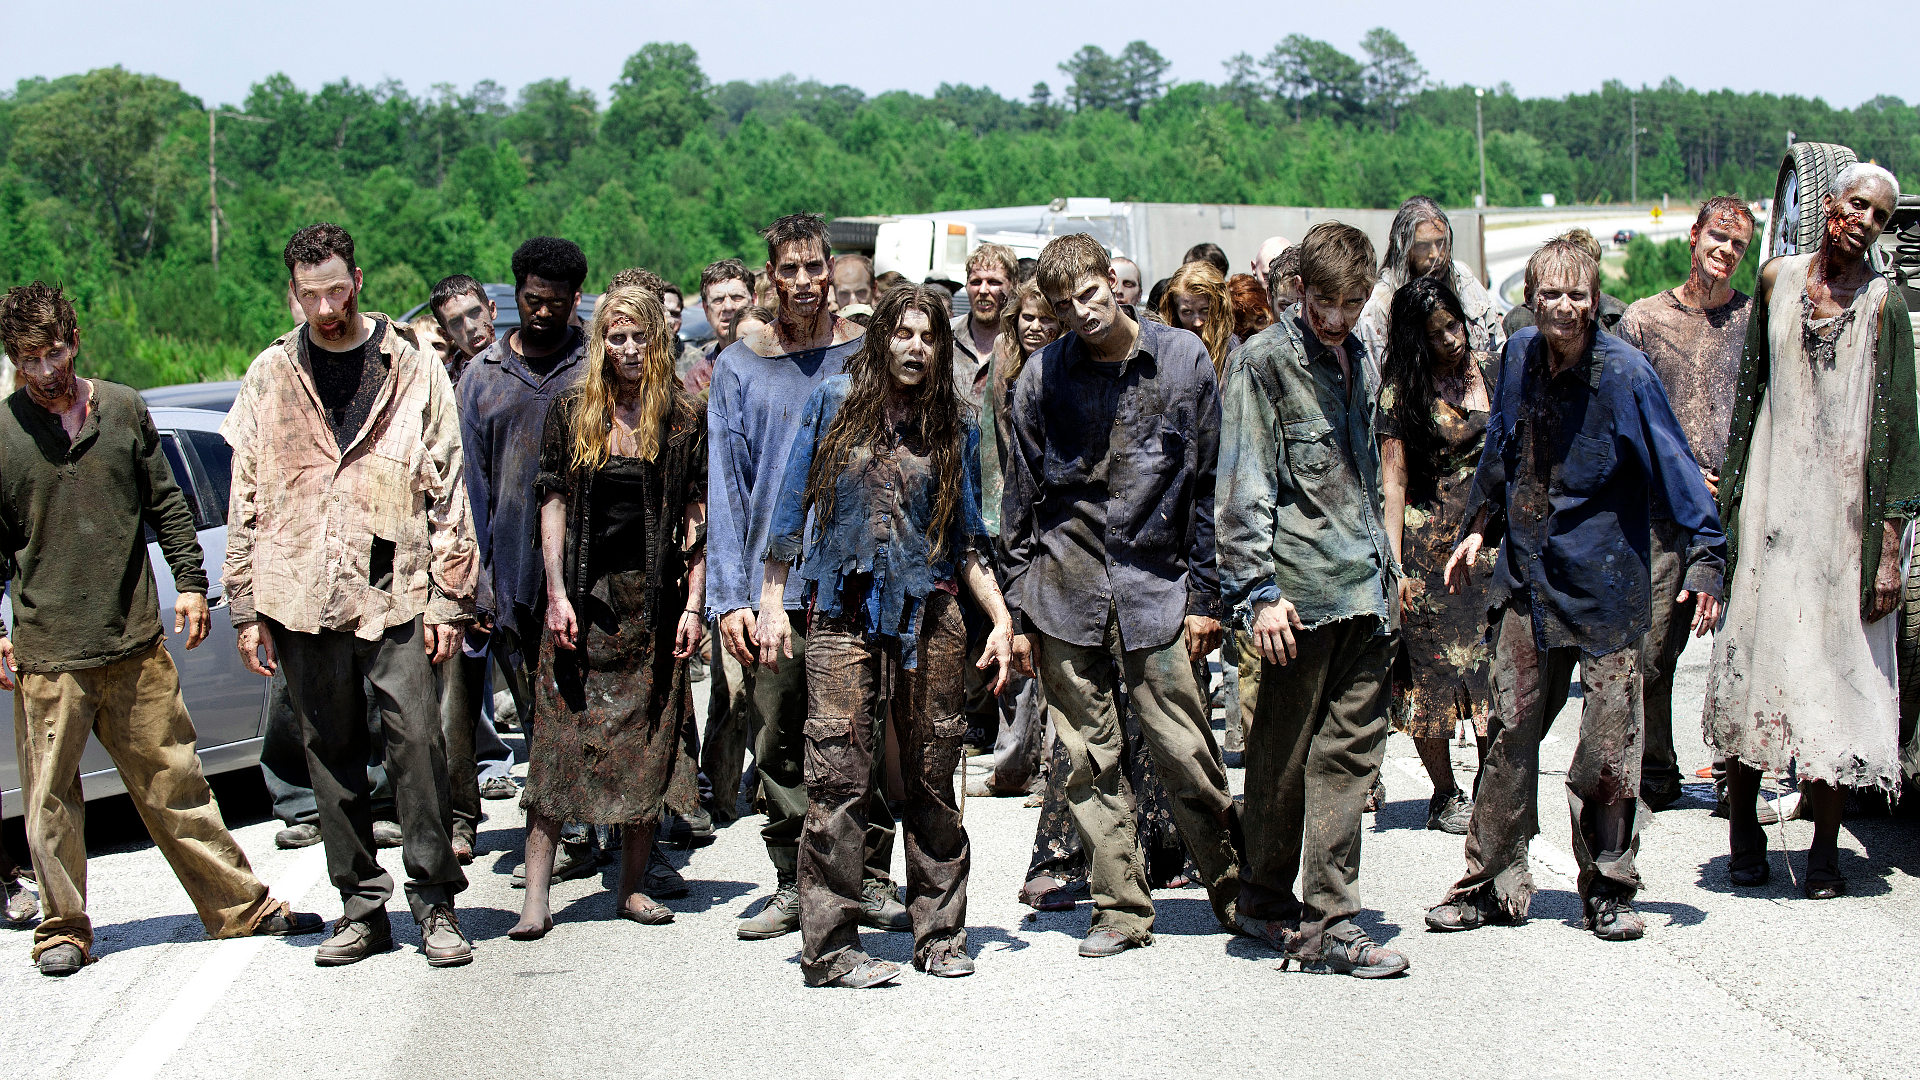 SMS could help you from a zombie apocalypse!